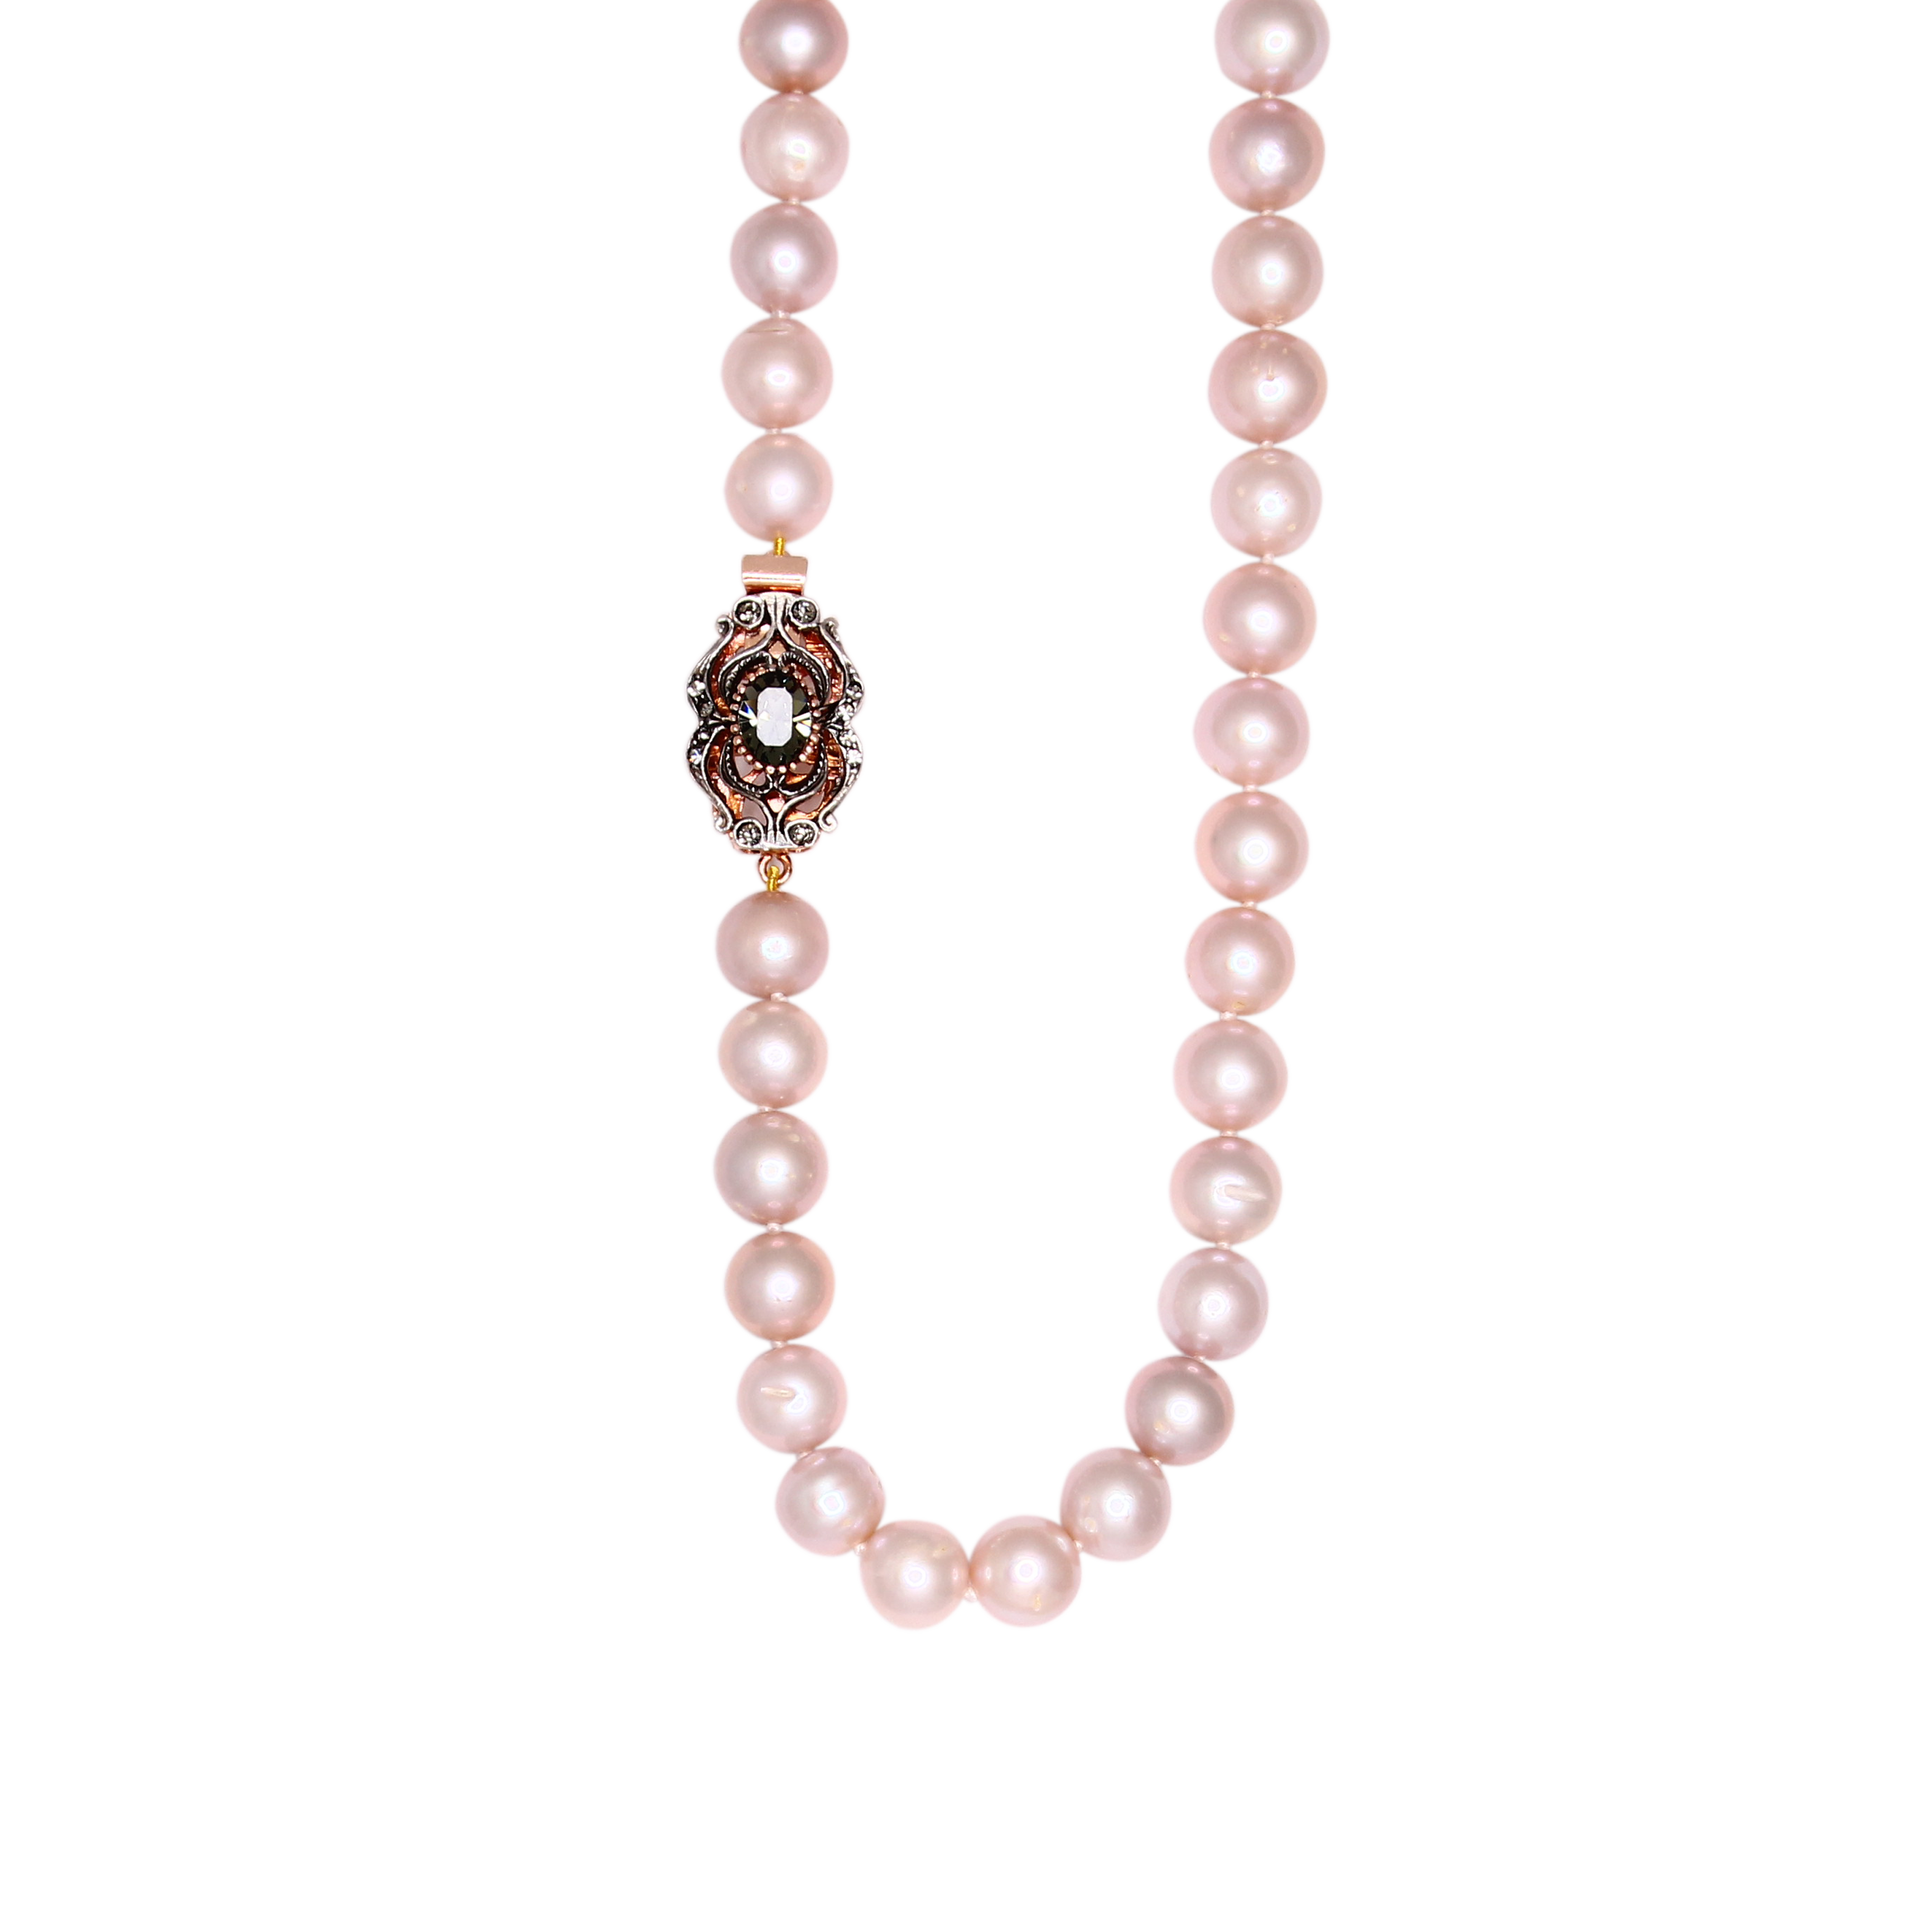 10-11mm Cultured Pink Pearl Knotted 24”